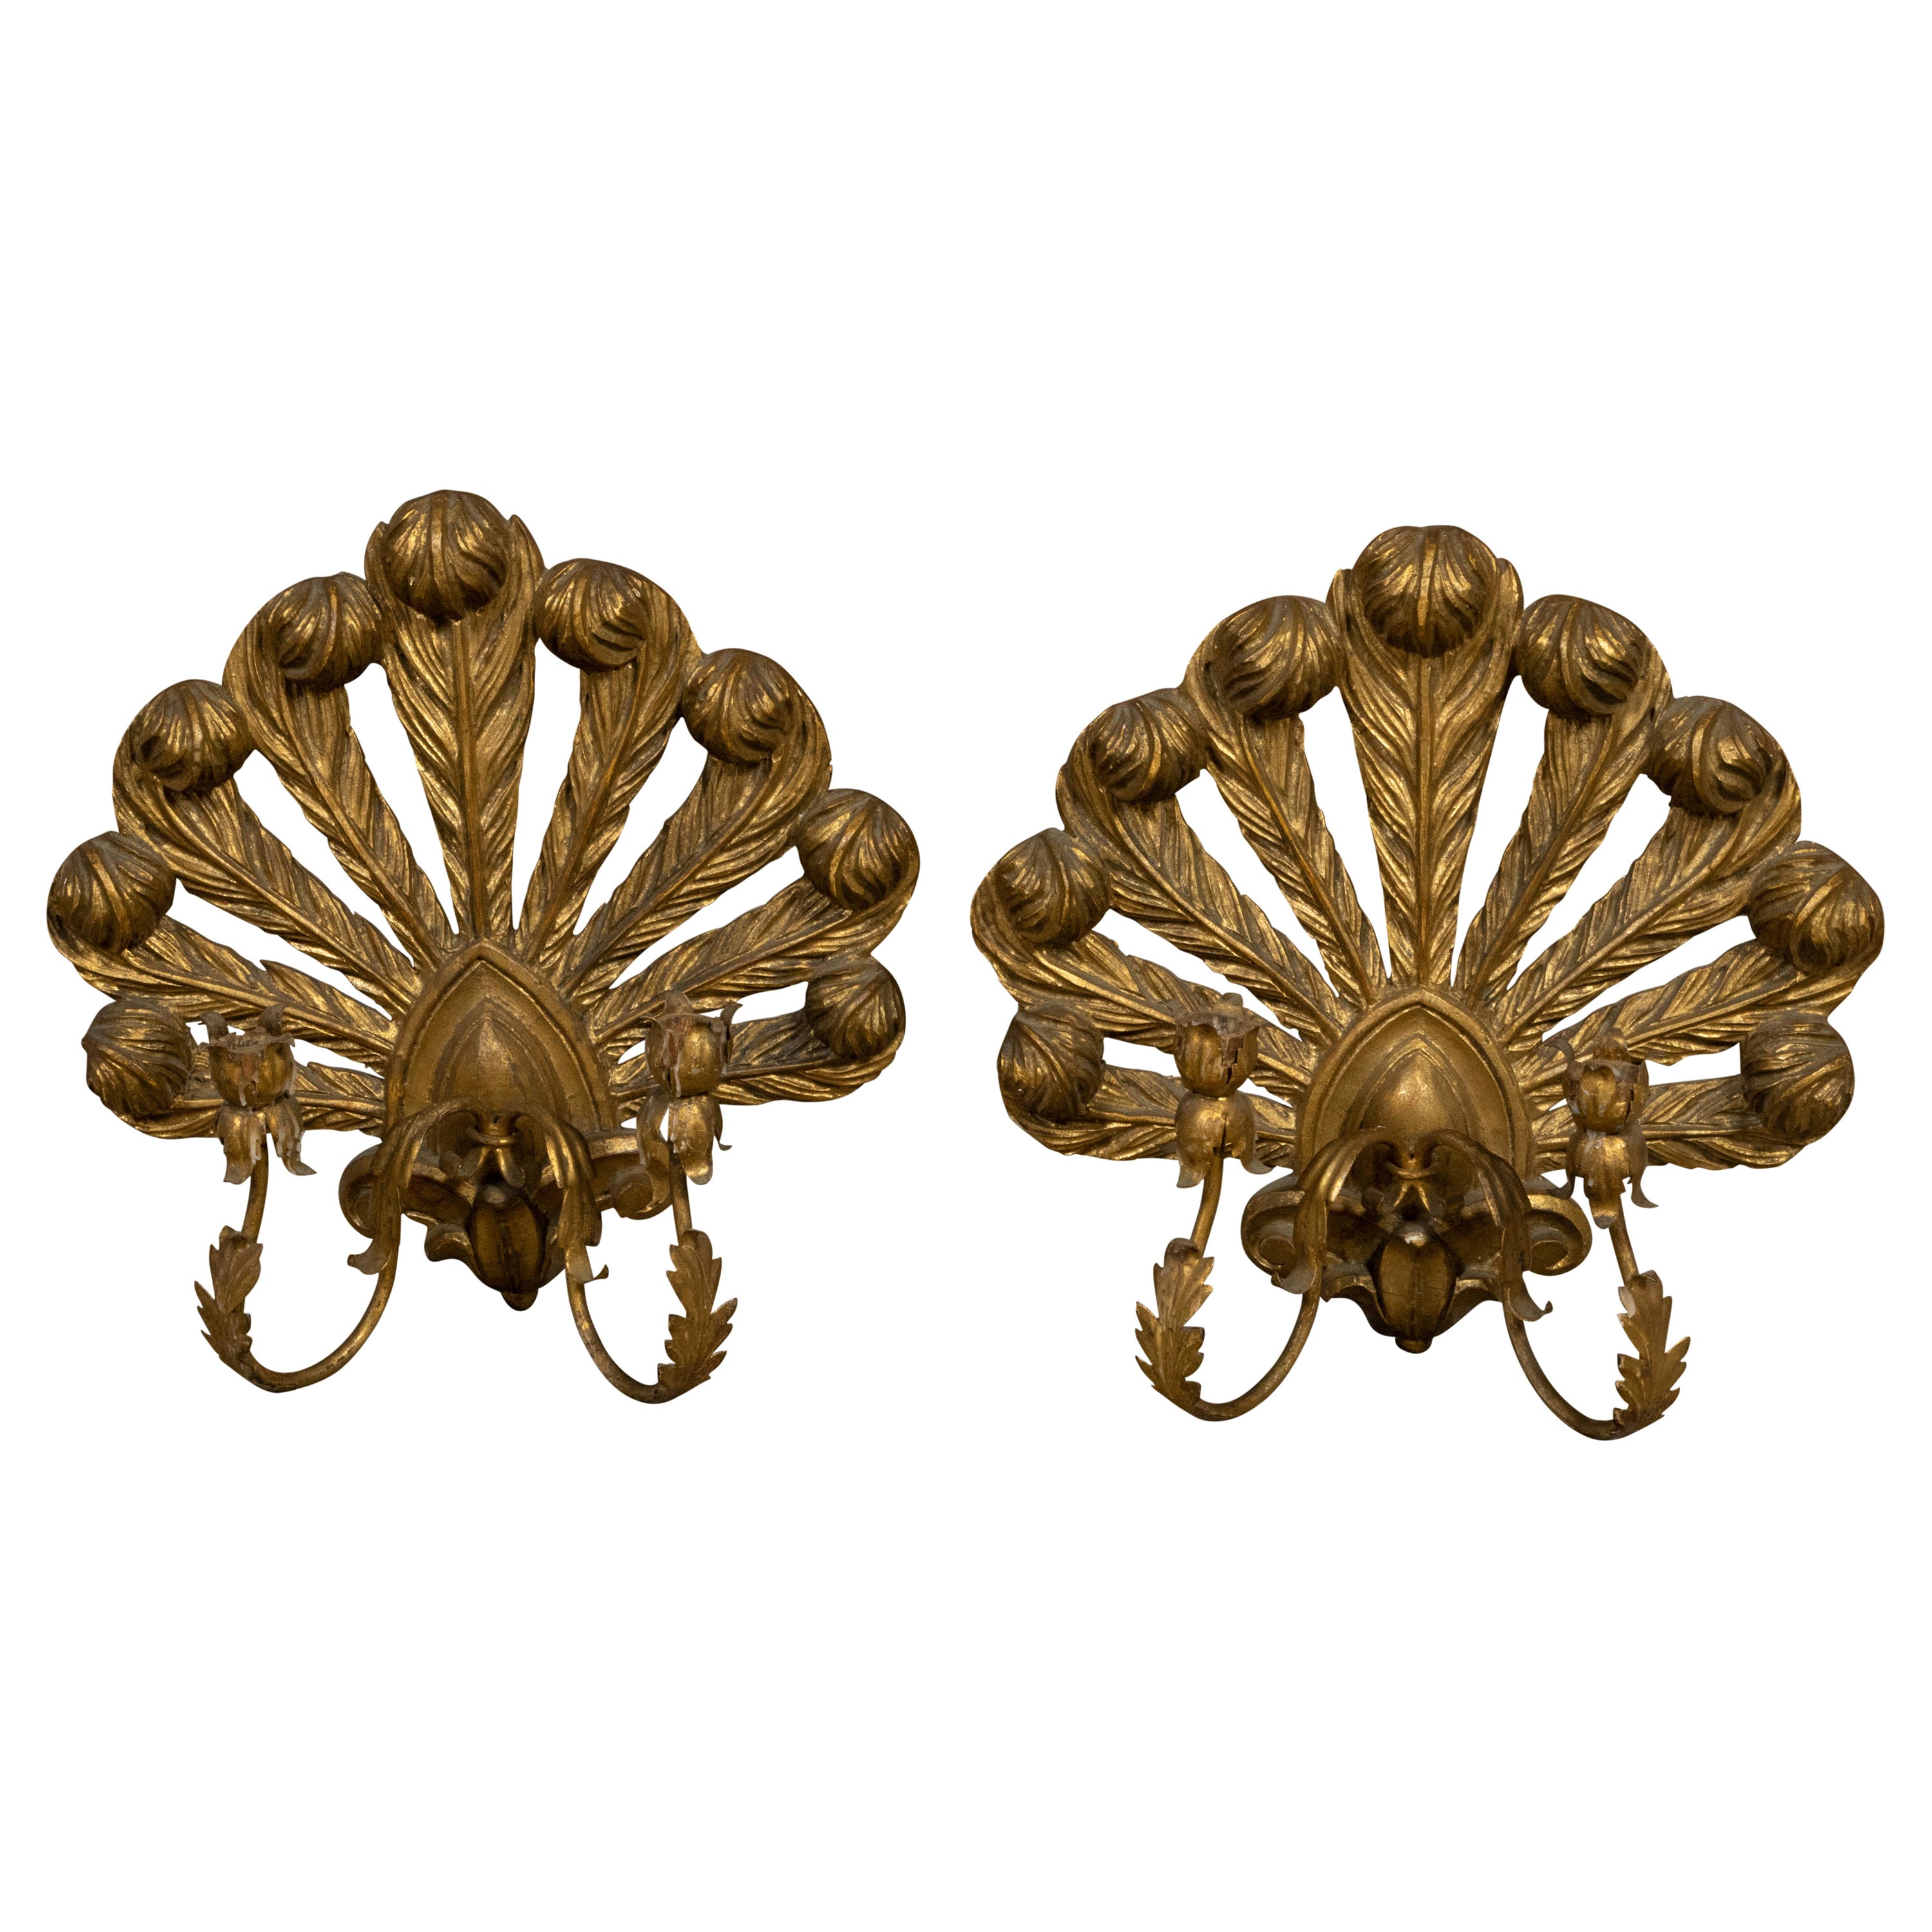 Pair of Italian Midcentury Giltwood Candle Sconces with Carved Feathers